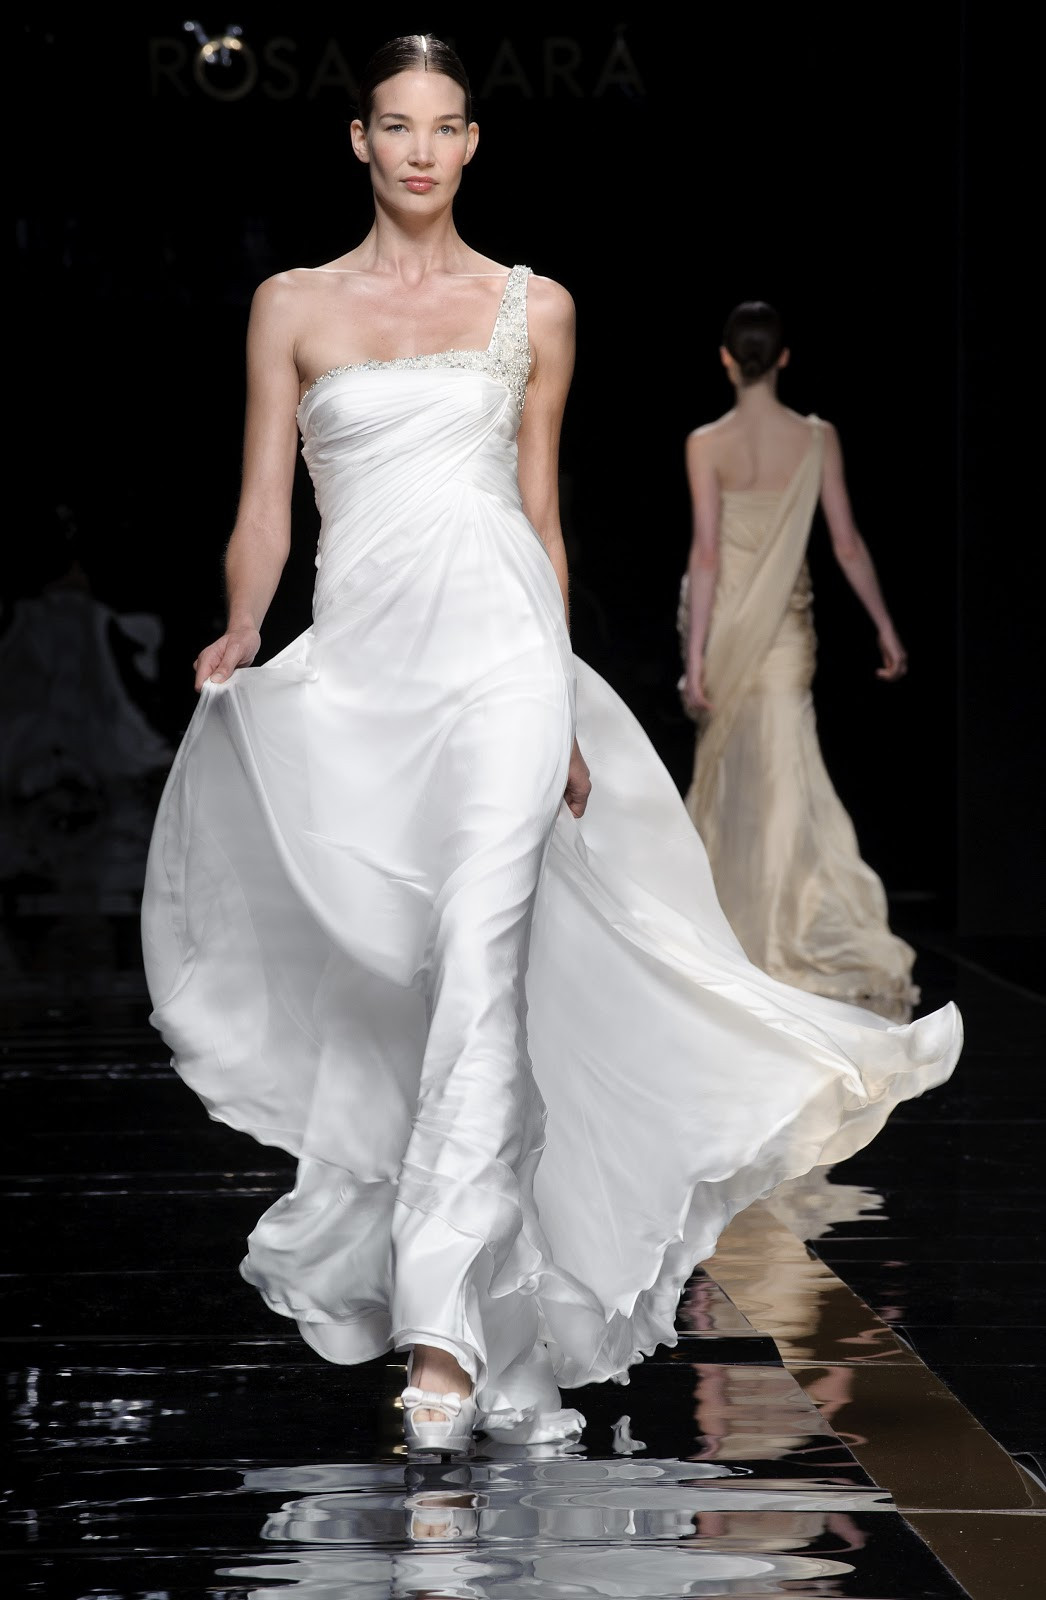 Wedding Gowns Atlanta
 The Wedding is Over How to Sell Your Wedding Dress on